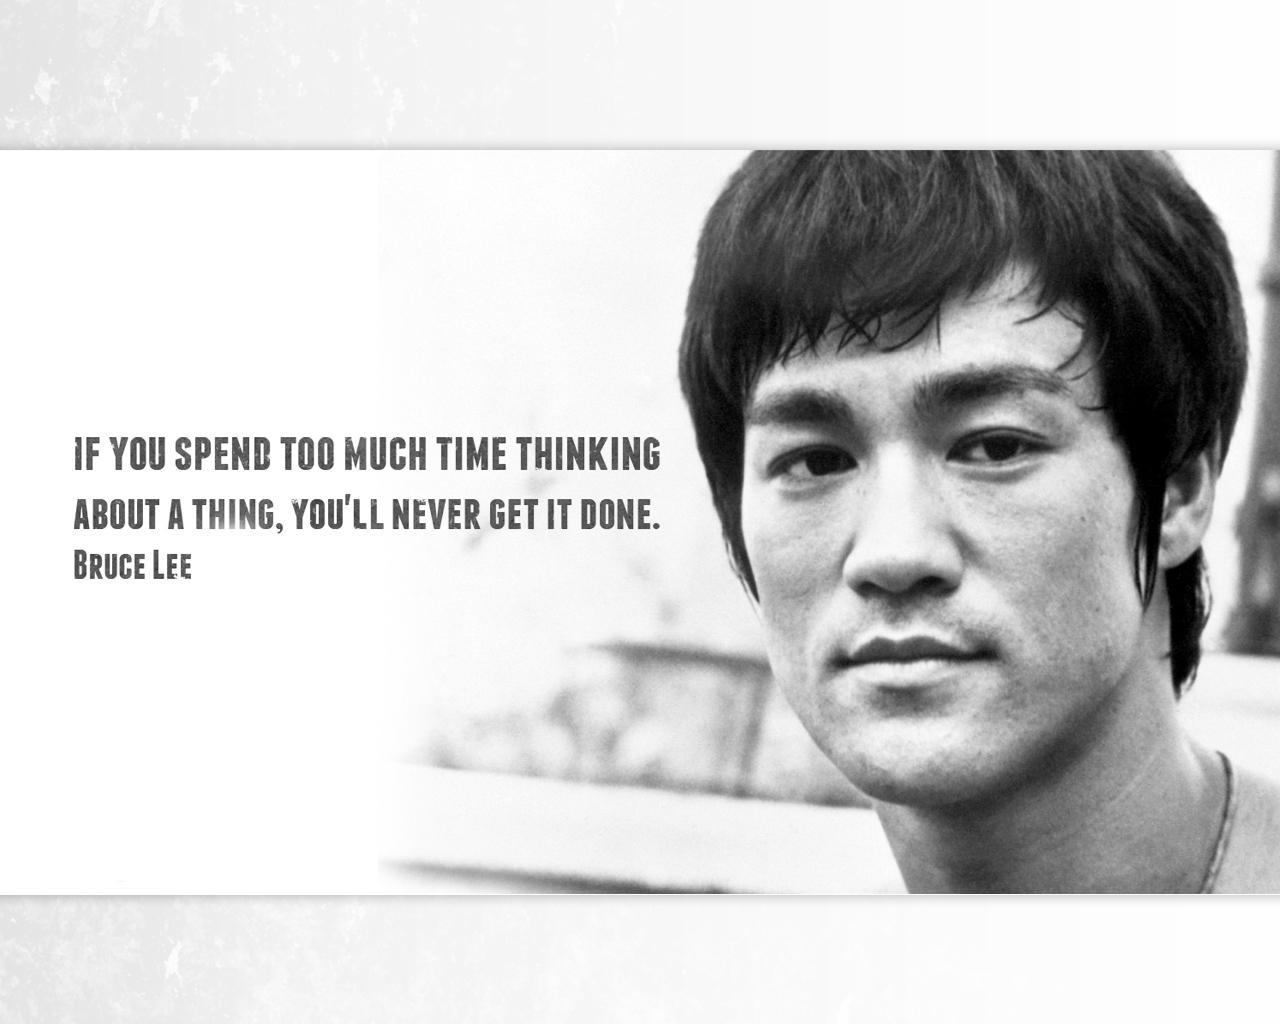 Bruce Lee Motivational Quote
 BRUCE LEE Quotes